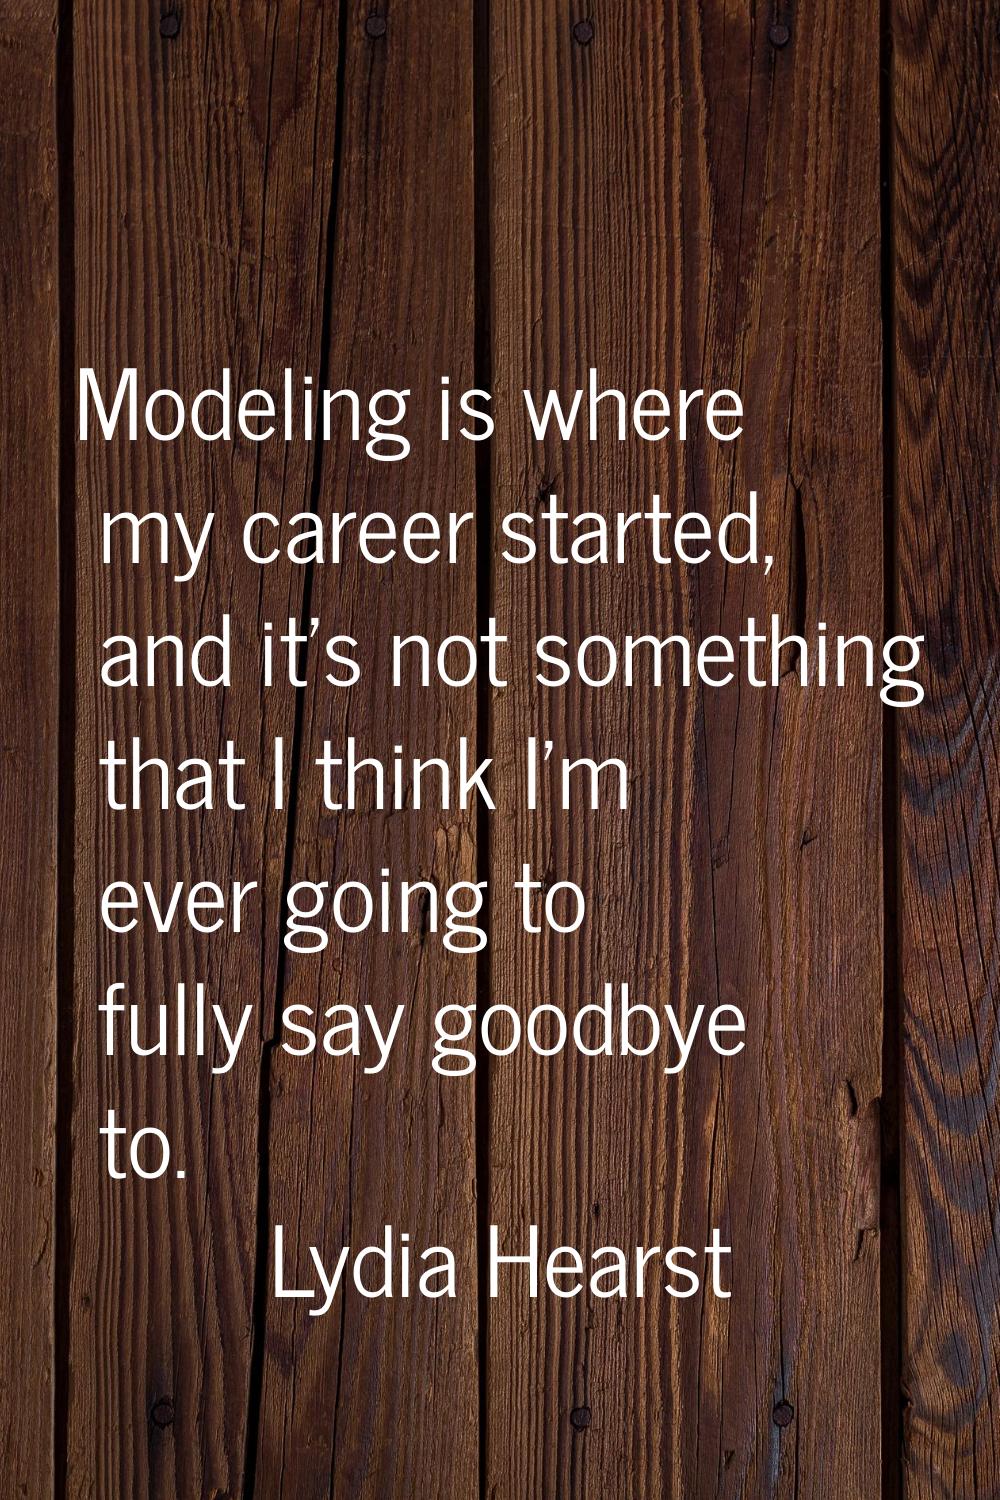 Modeling is where my career started, and it's not something that I think I'm ever going to fully sa